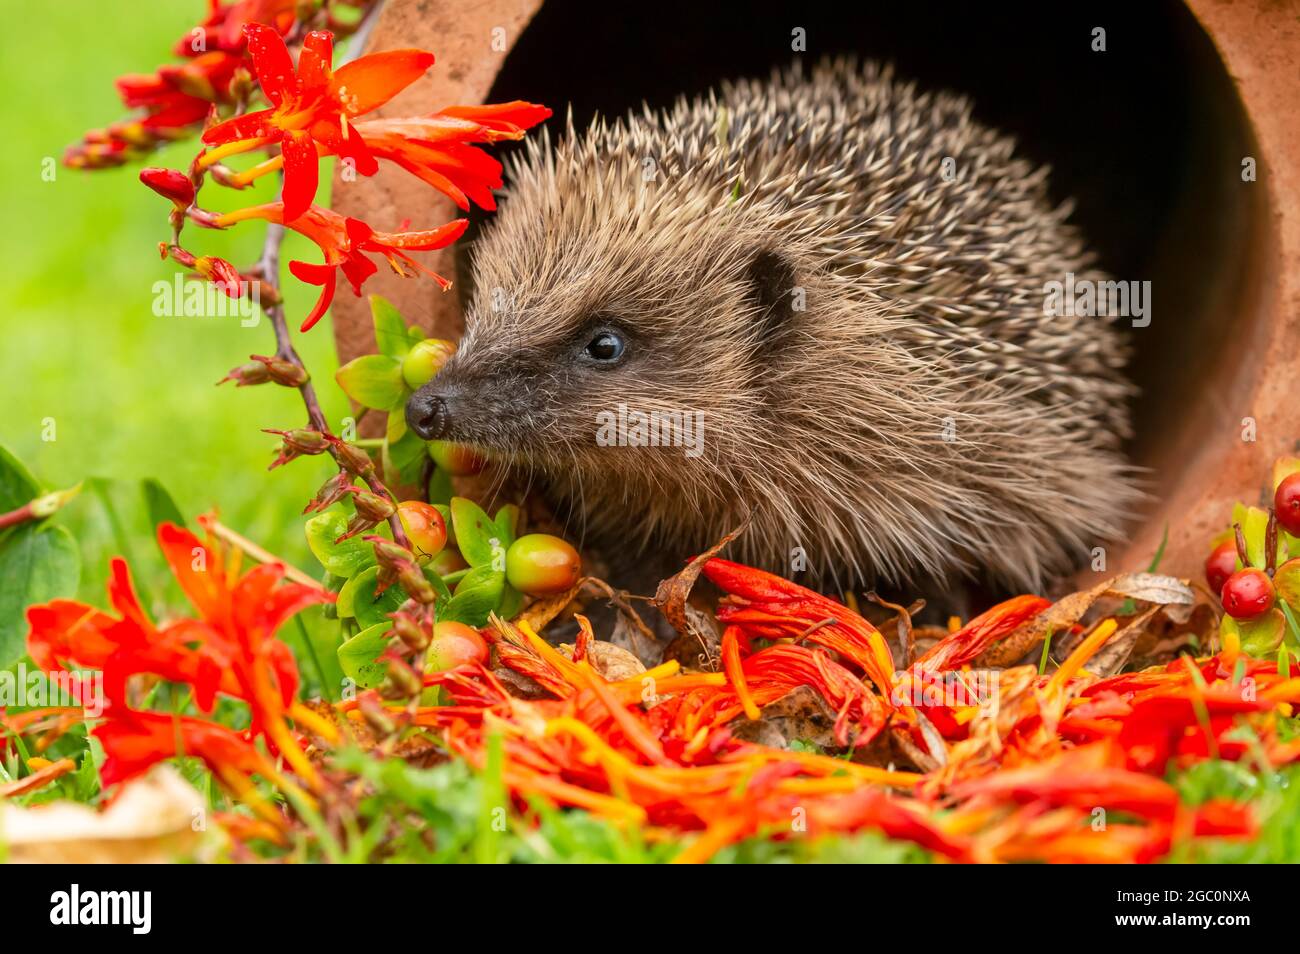 Wild, native, hedgehog emerging from a terracotta drainage pipe with colourful Crocosmia flowers and honeysuckle berries.  Facing left.  Scientific na Stock Photo